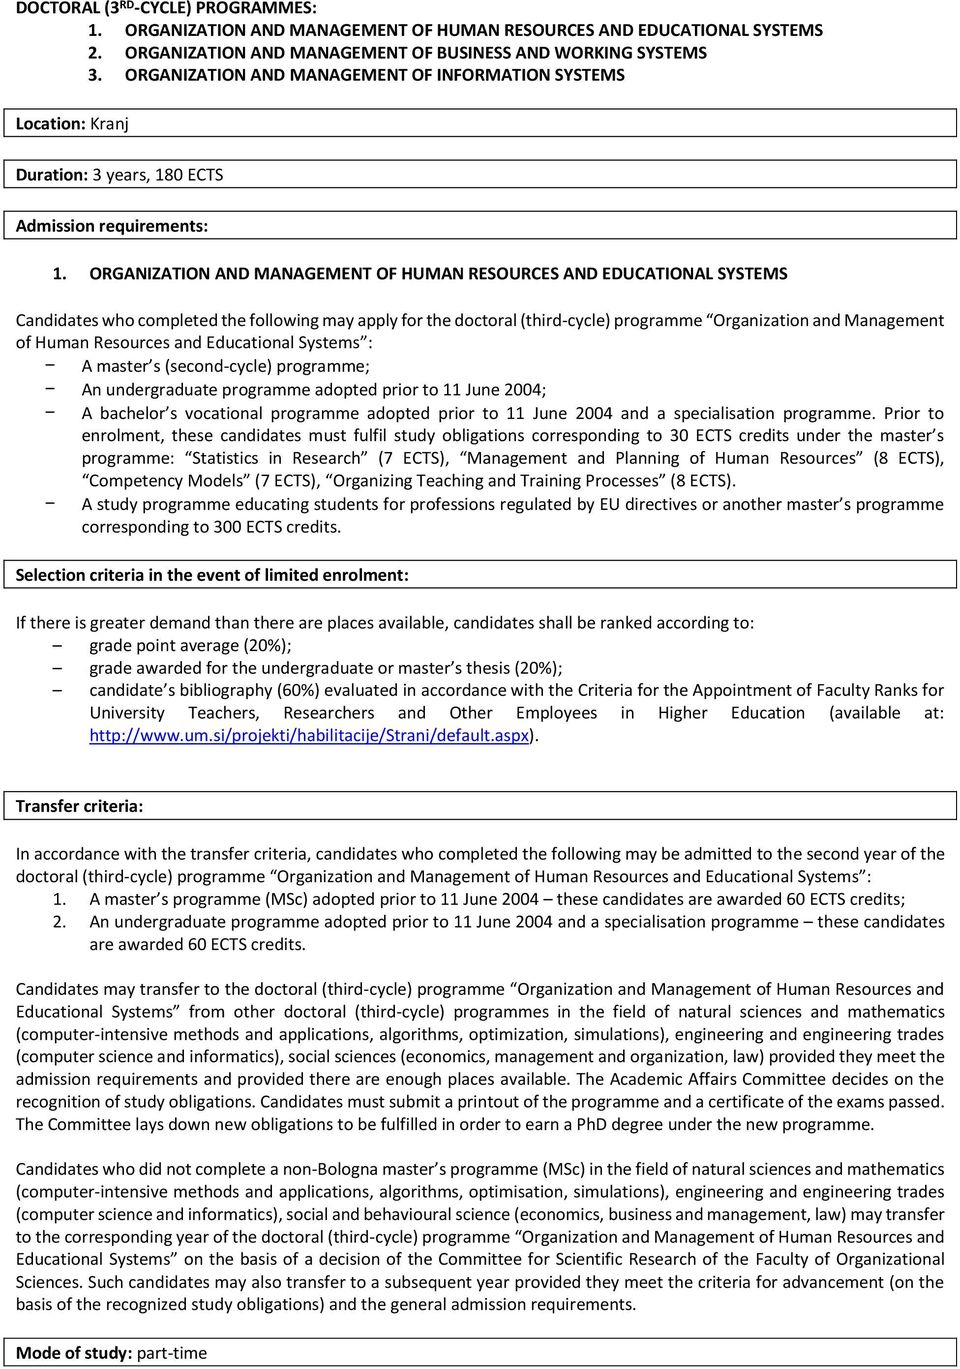 ORGANIZATION AND MANAGEMENT OF HUMAN RESOURCES AND EDUCATIONAL SYSTEMS Candidates who completed the following may apply for the doctoral (third-cycle) programme Organization and Management of Human